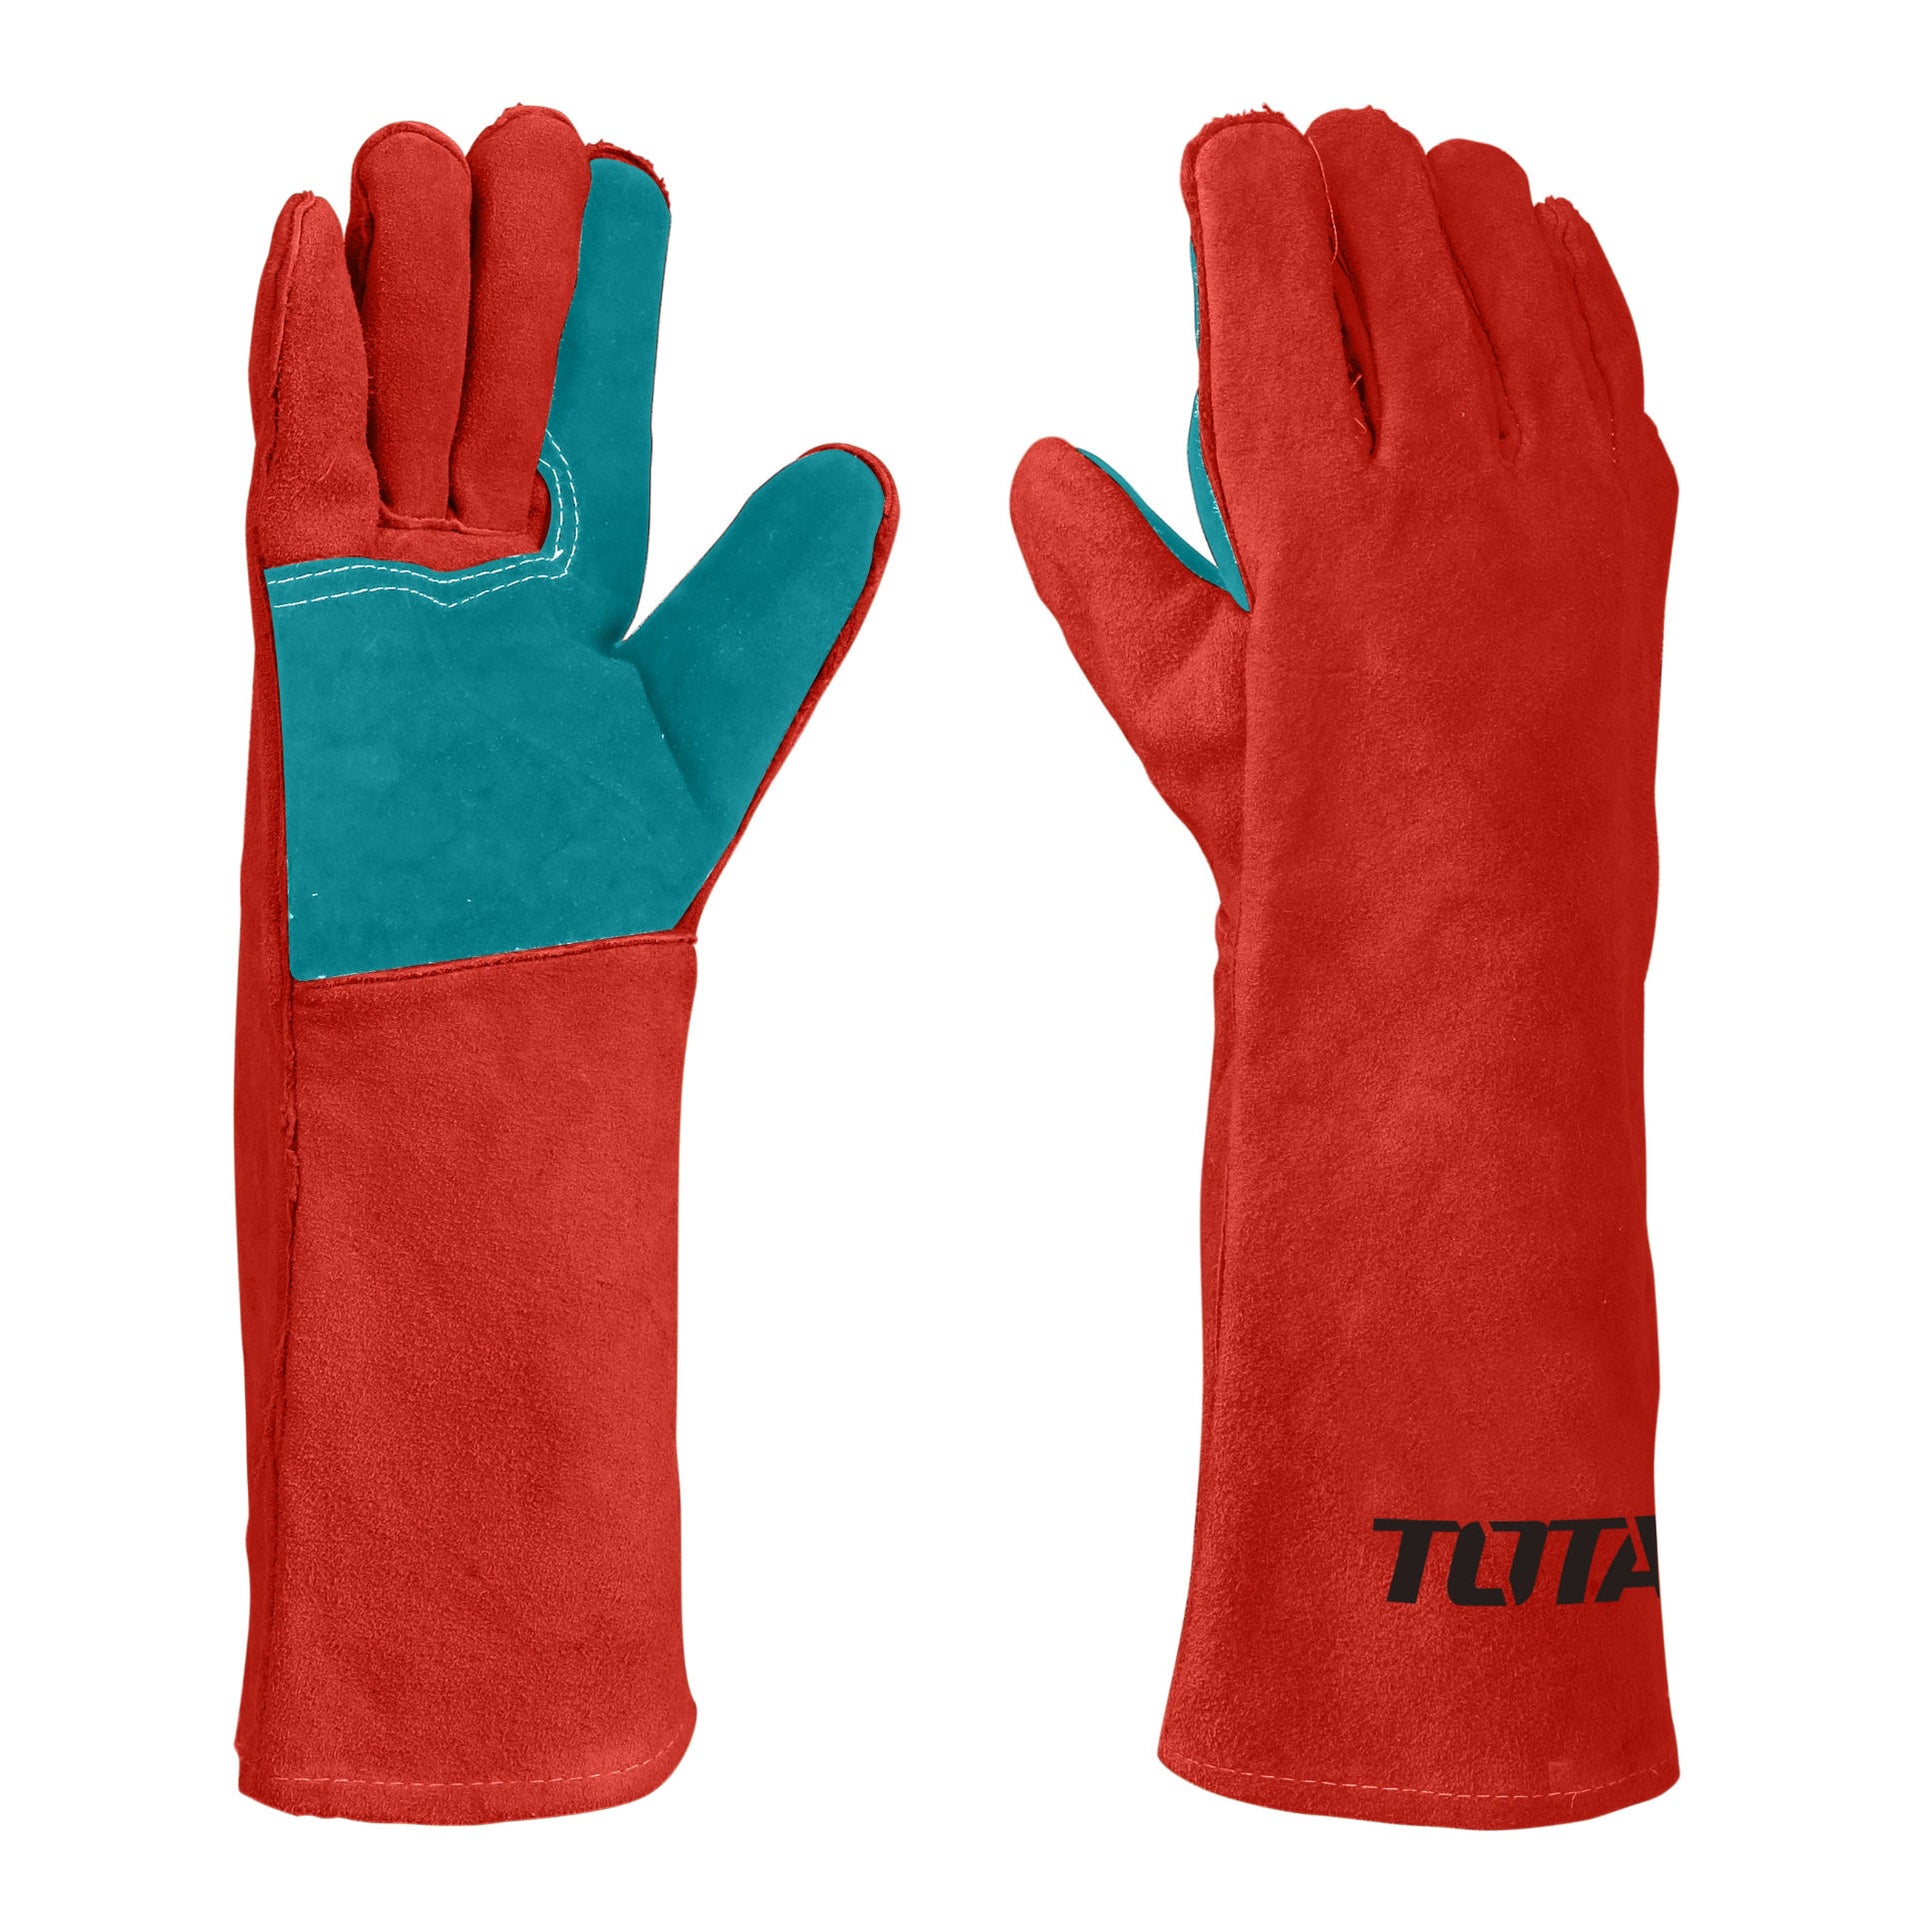 TOTAL | Glove Leather Welding - BPM Toolcraft